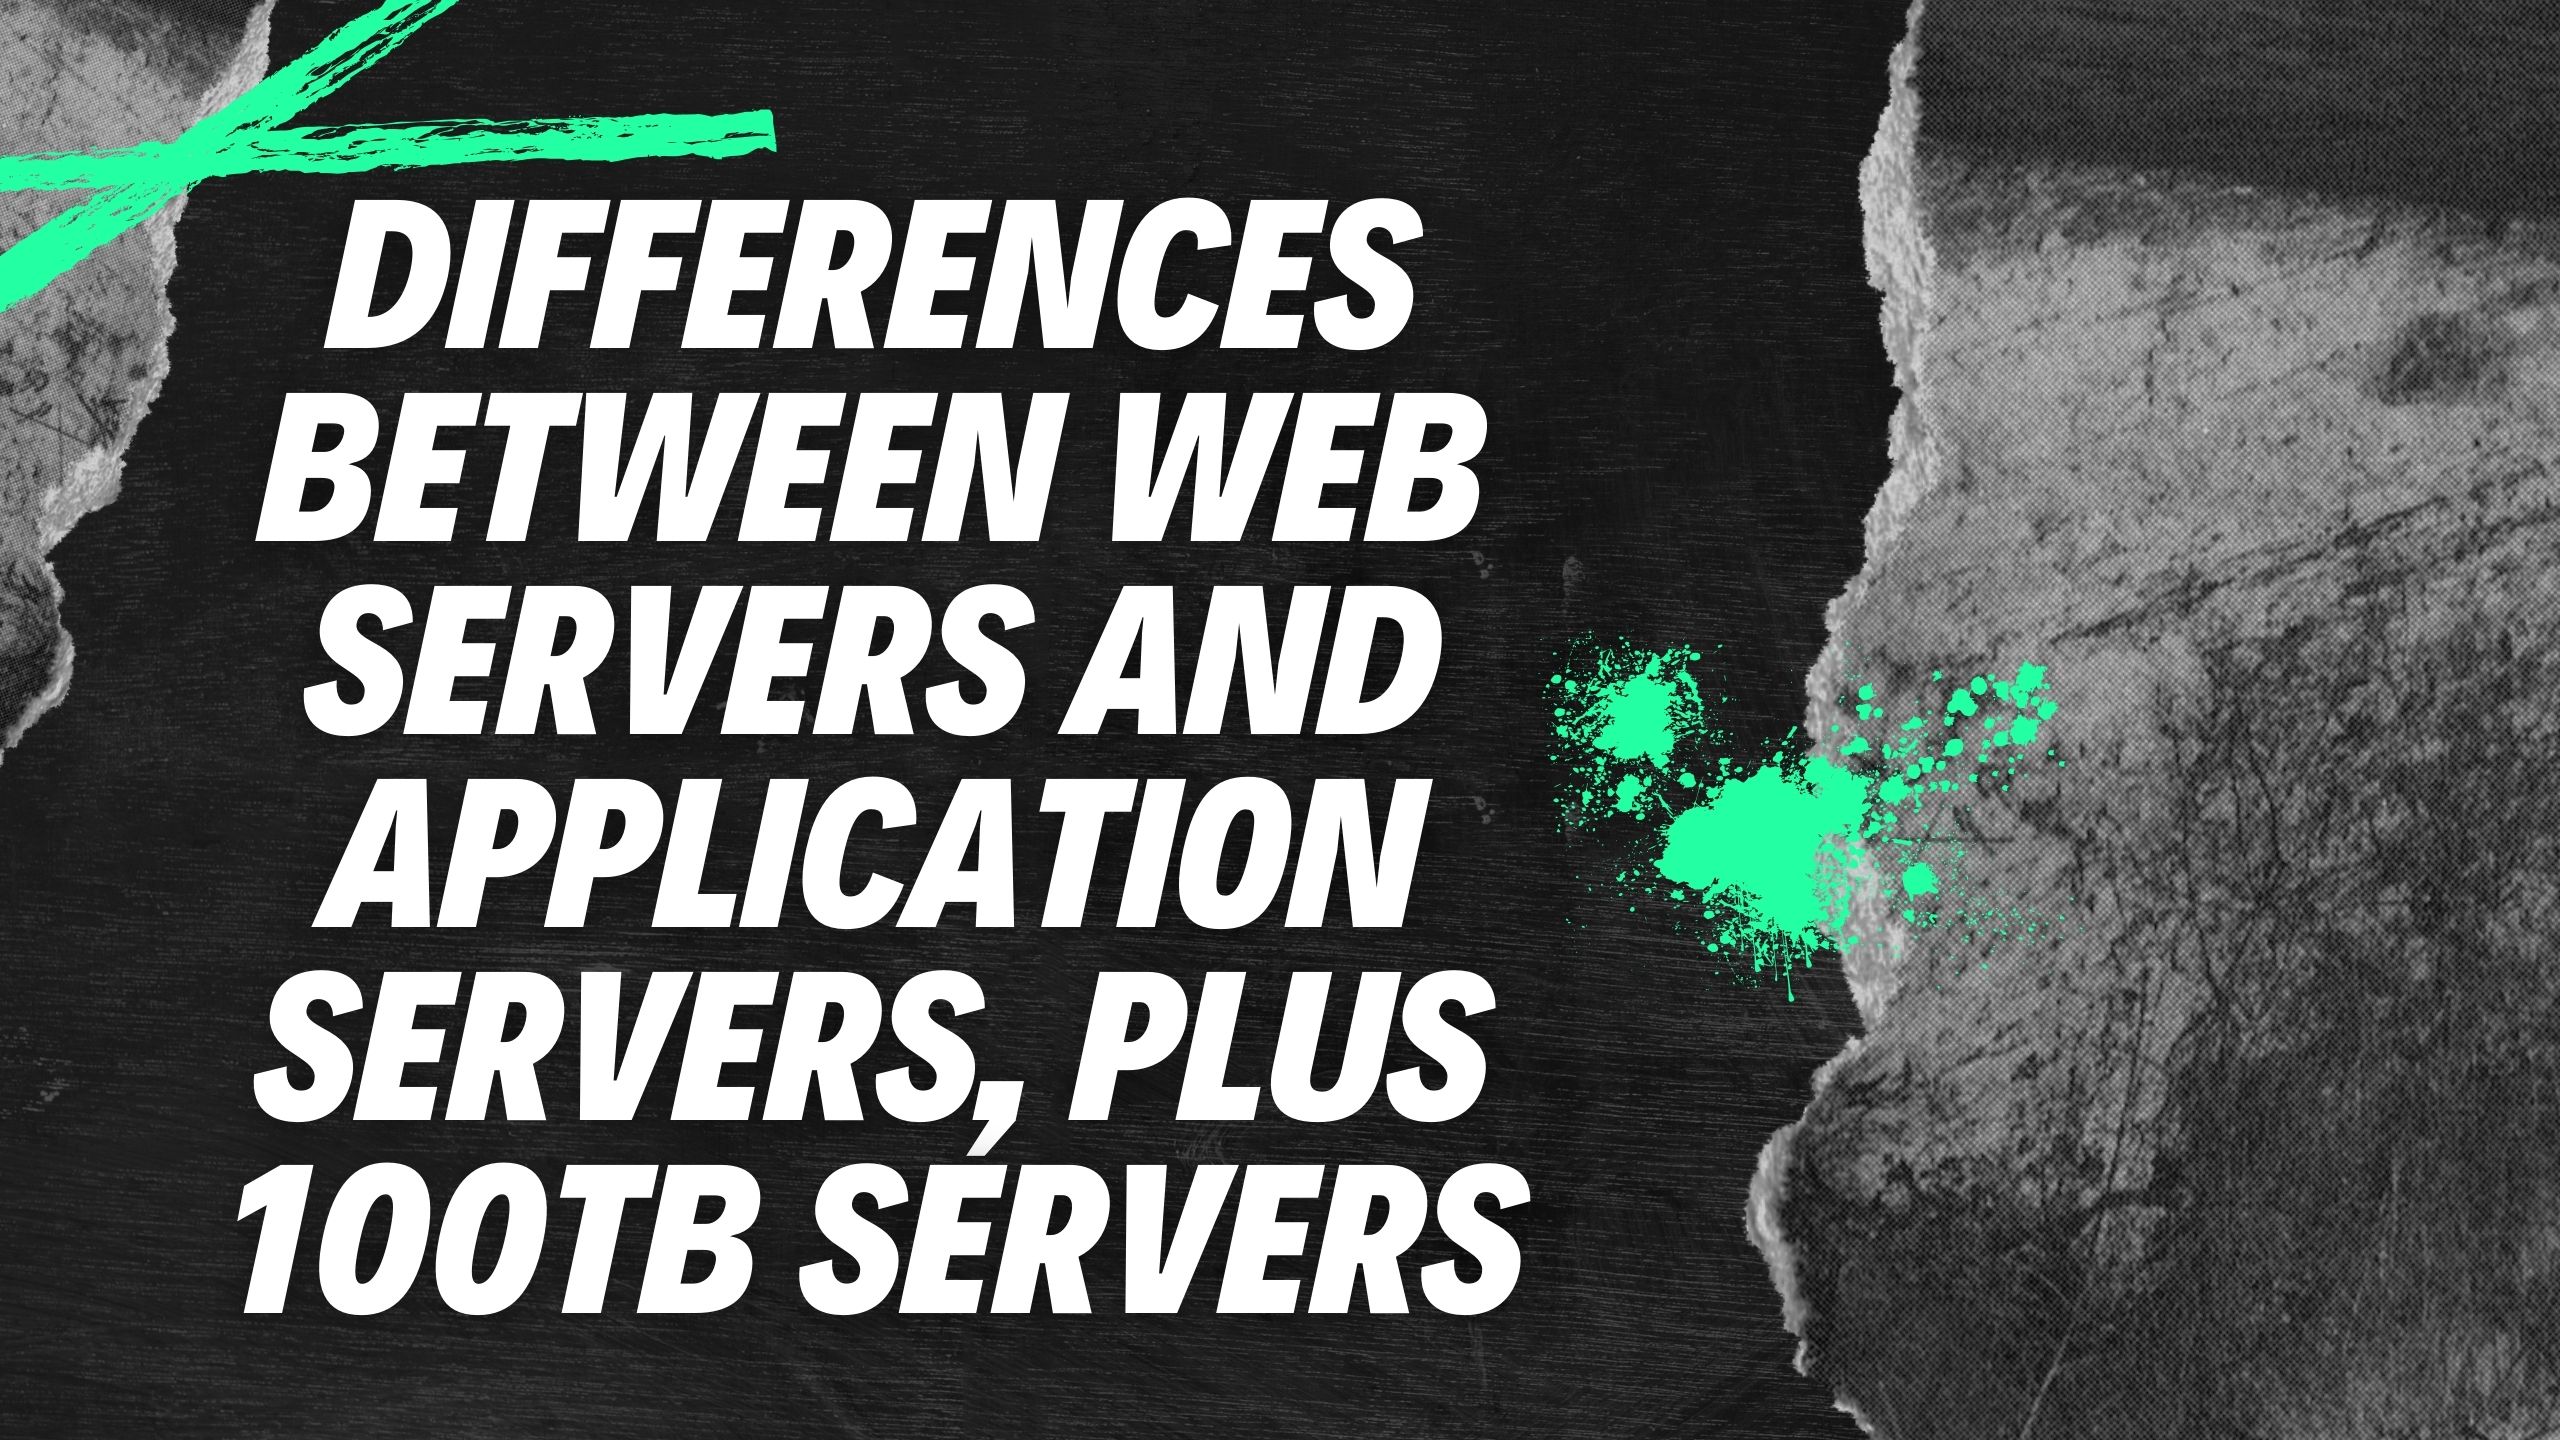 Differences Between Web Servers and Application Servers, Plus 100TB Servers